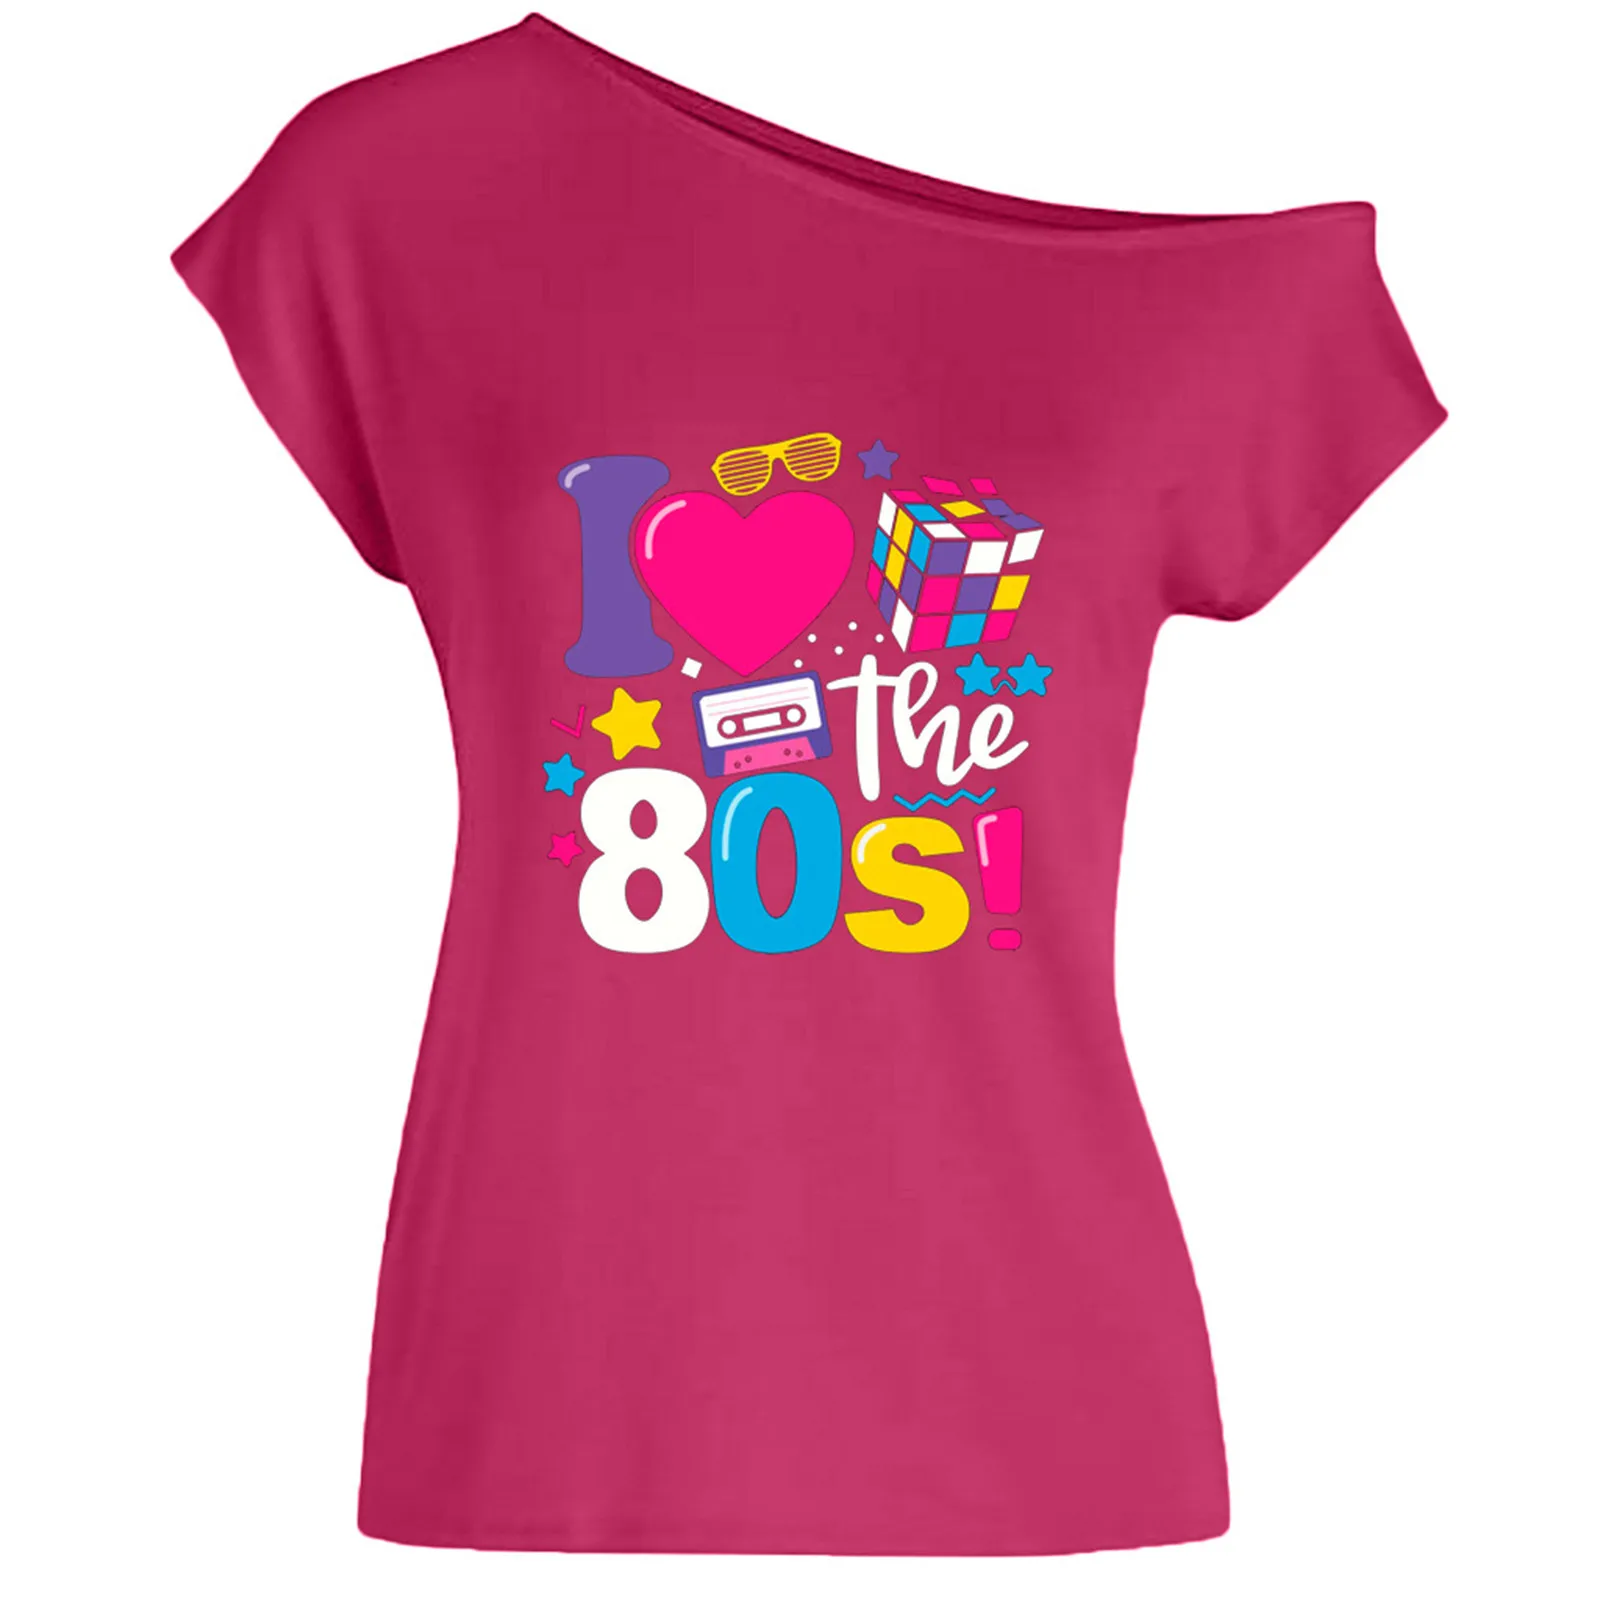 I Love The 80s Off The Shoulder Tops Female Summer Casual Short Sleeve Graphic Tees Streetwear Disco Costumes -S4c589bedc22045c89917af423d8855298